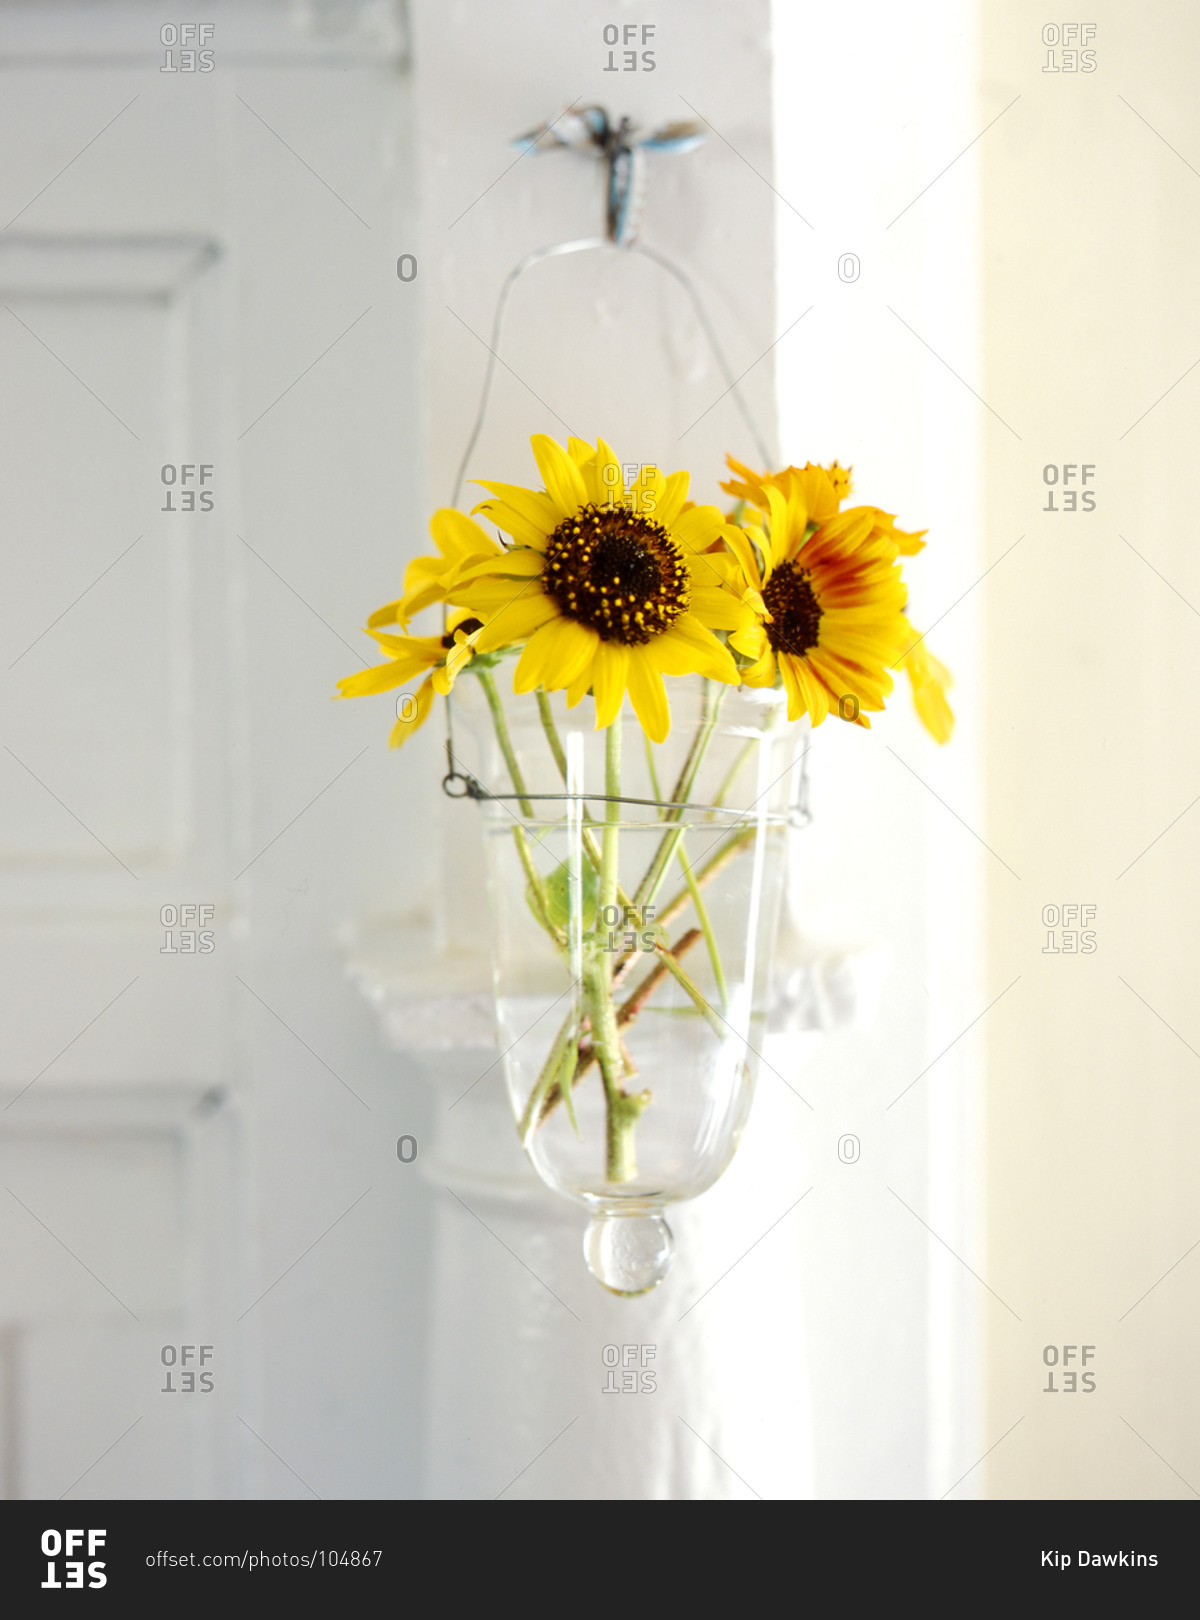 Sunflowers in a vase hooked on a door